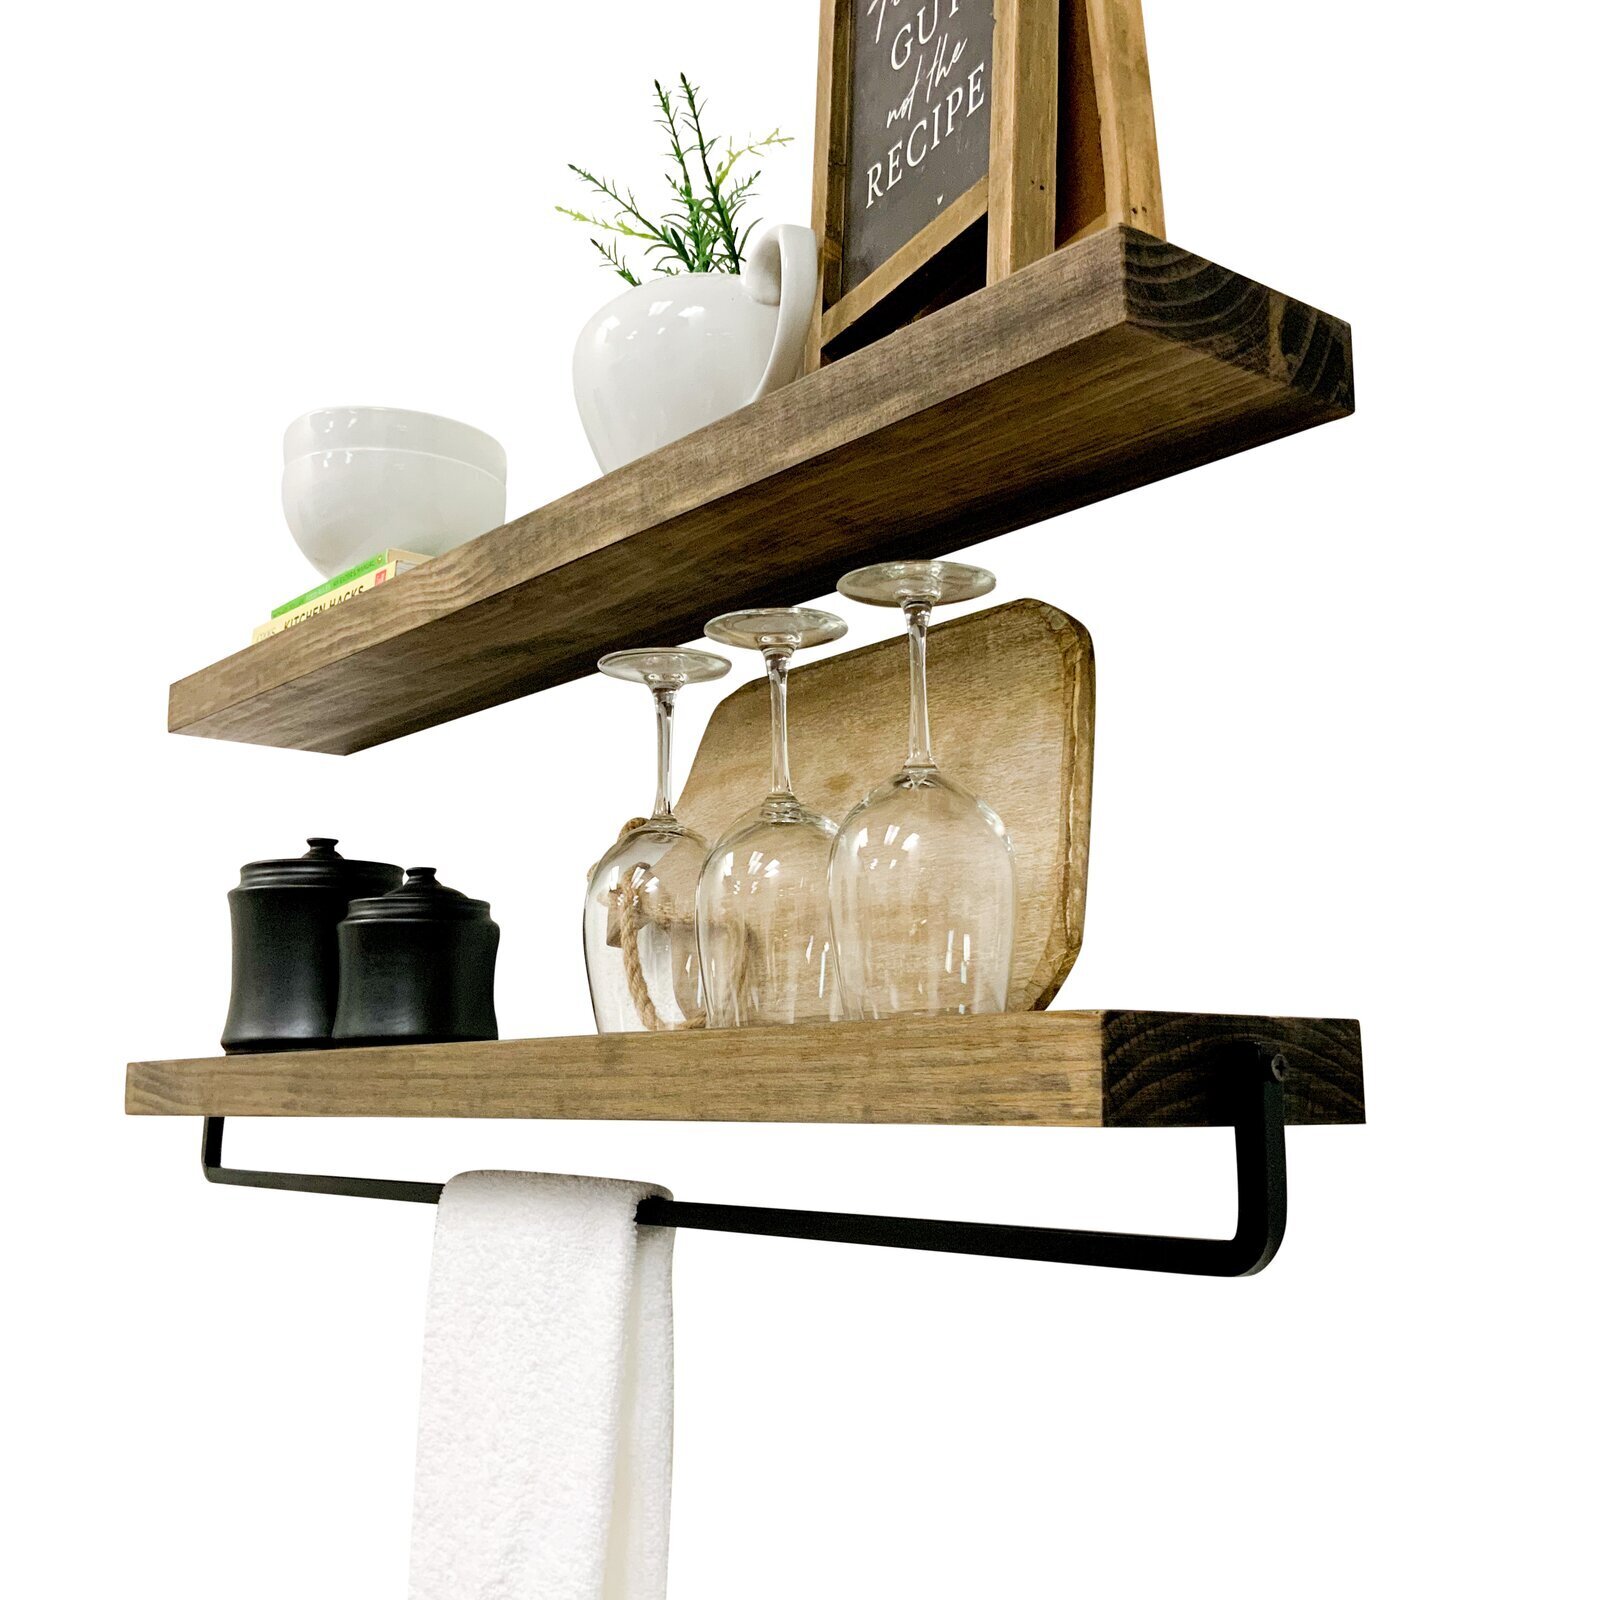 Wood Shelves with Rack